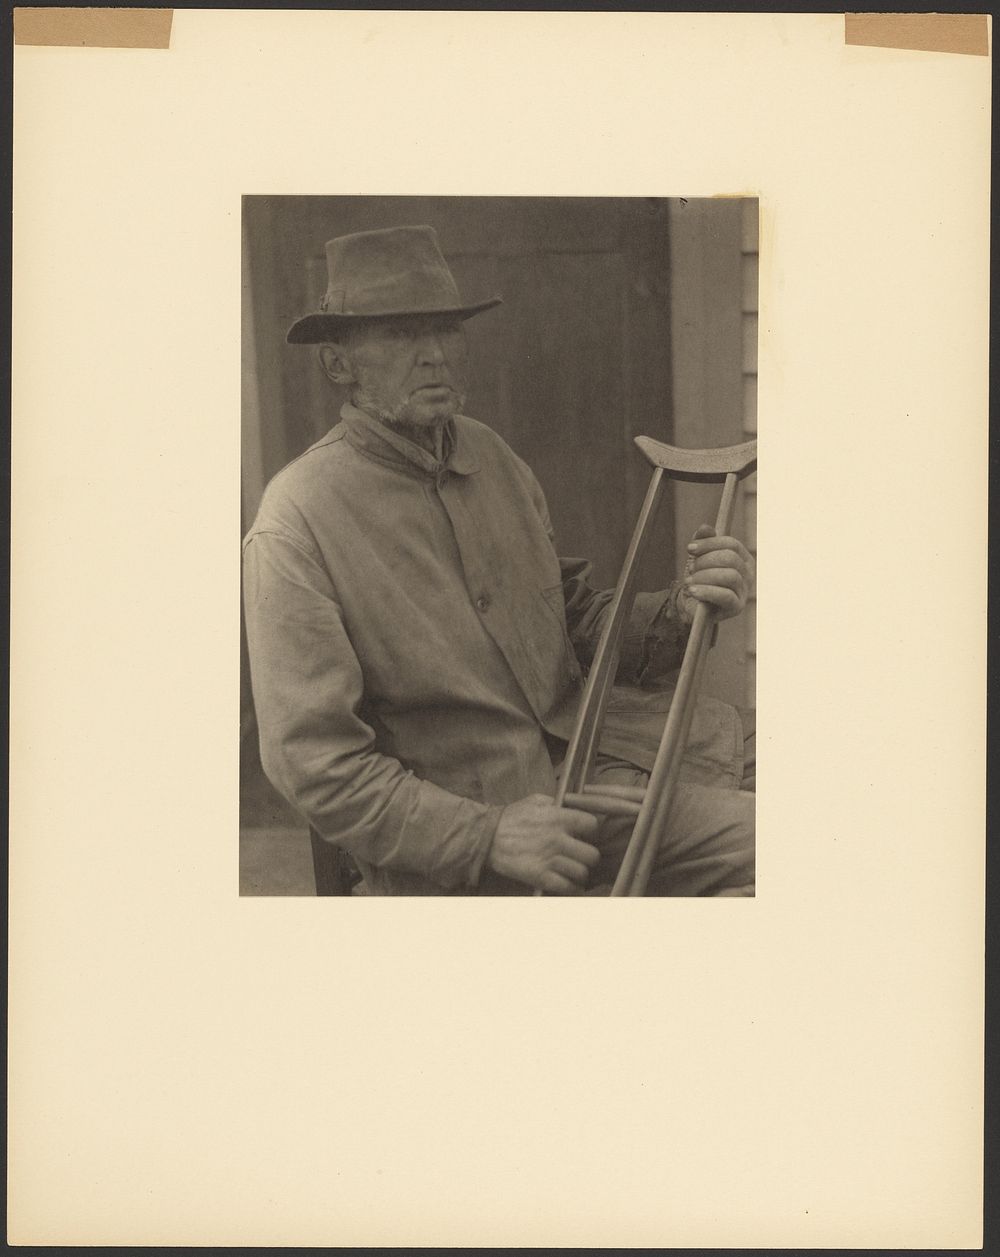 Seated Man Wearing Hat and Holding Crutches by Doris Ulmann